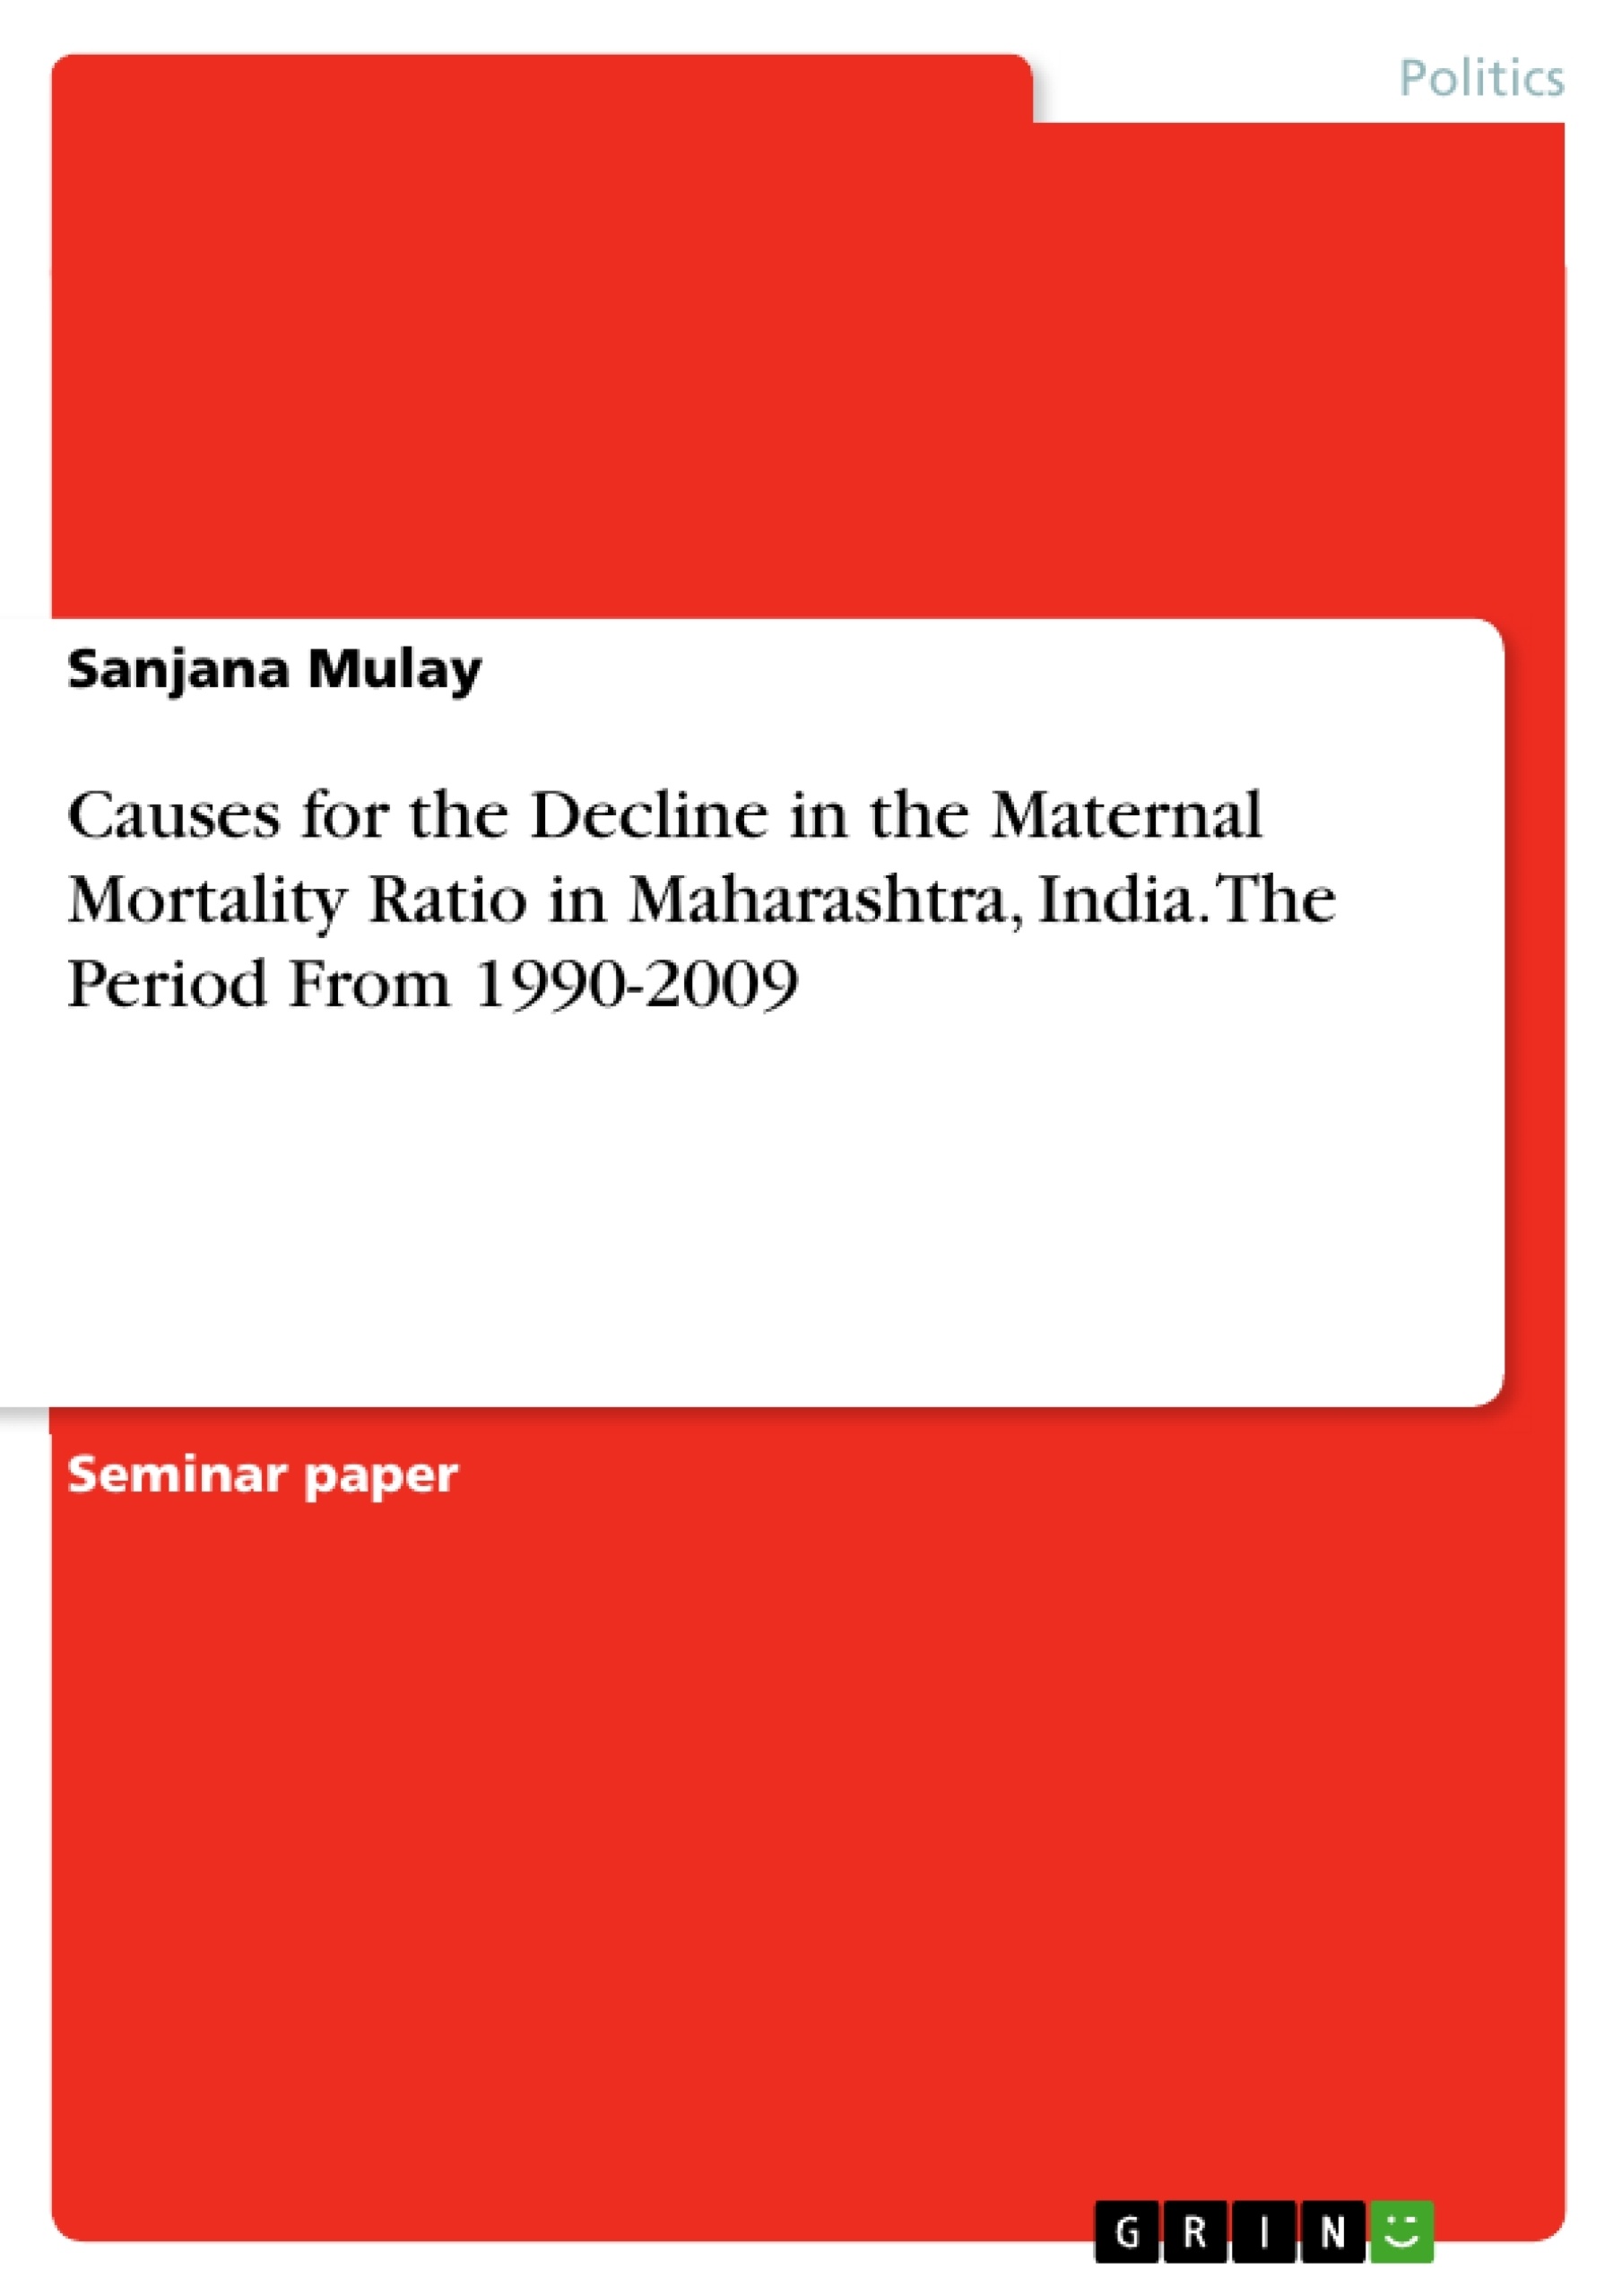 Title: Causes for the Decline in the Maternal Mortality Ratio in Maharashtra, India. The Period From 1990-2009